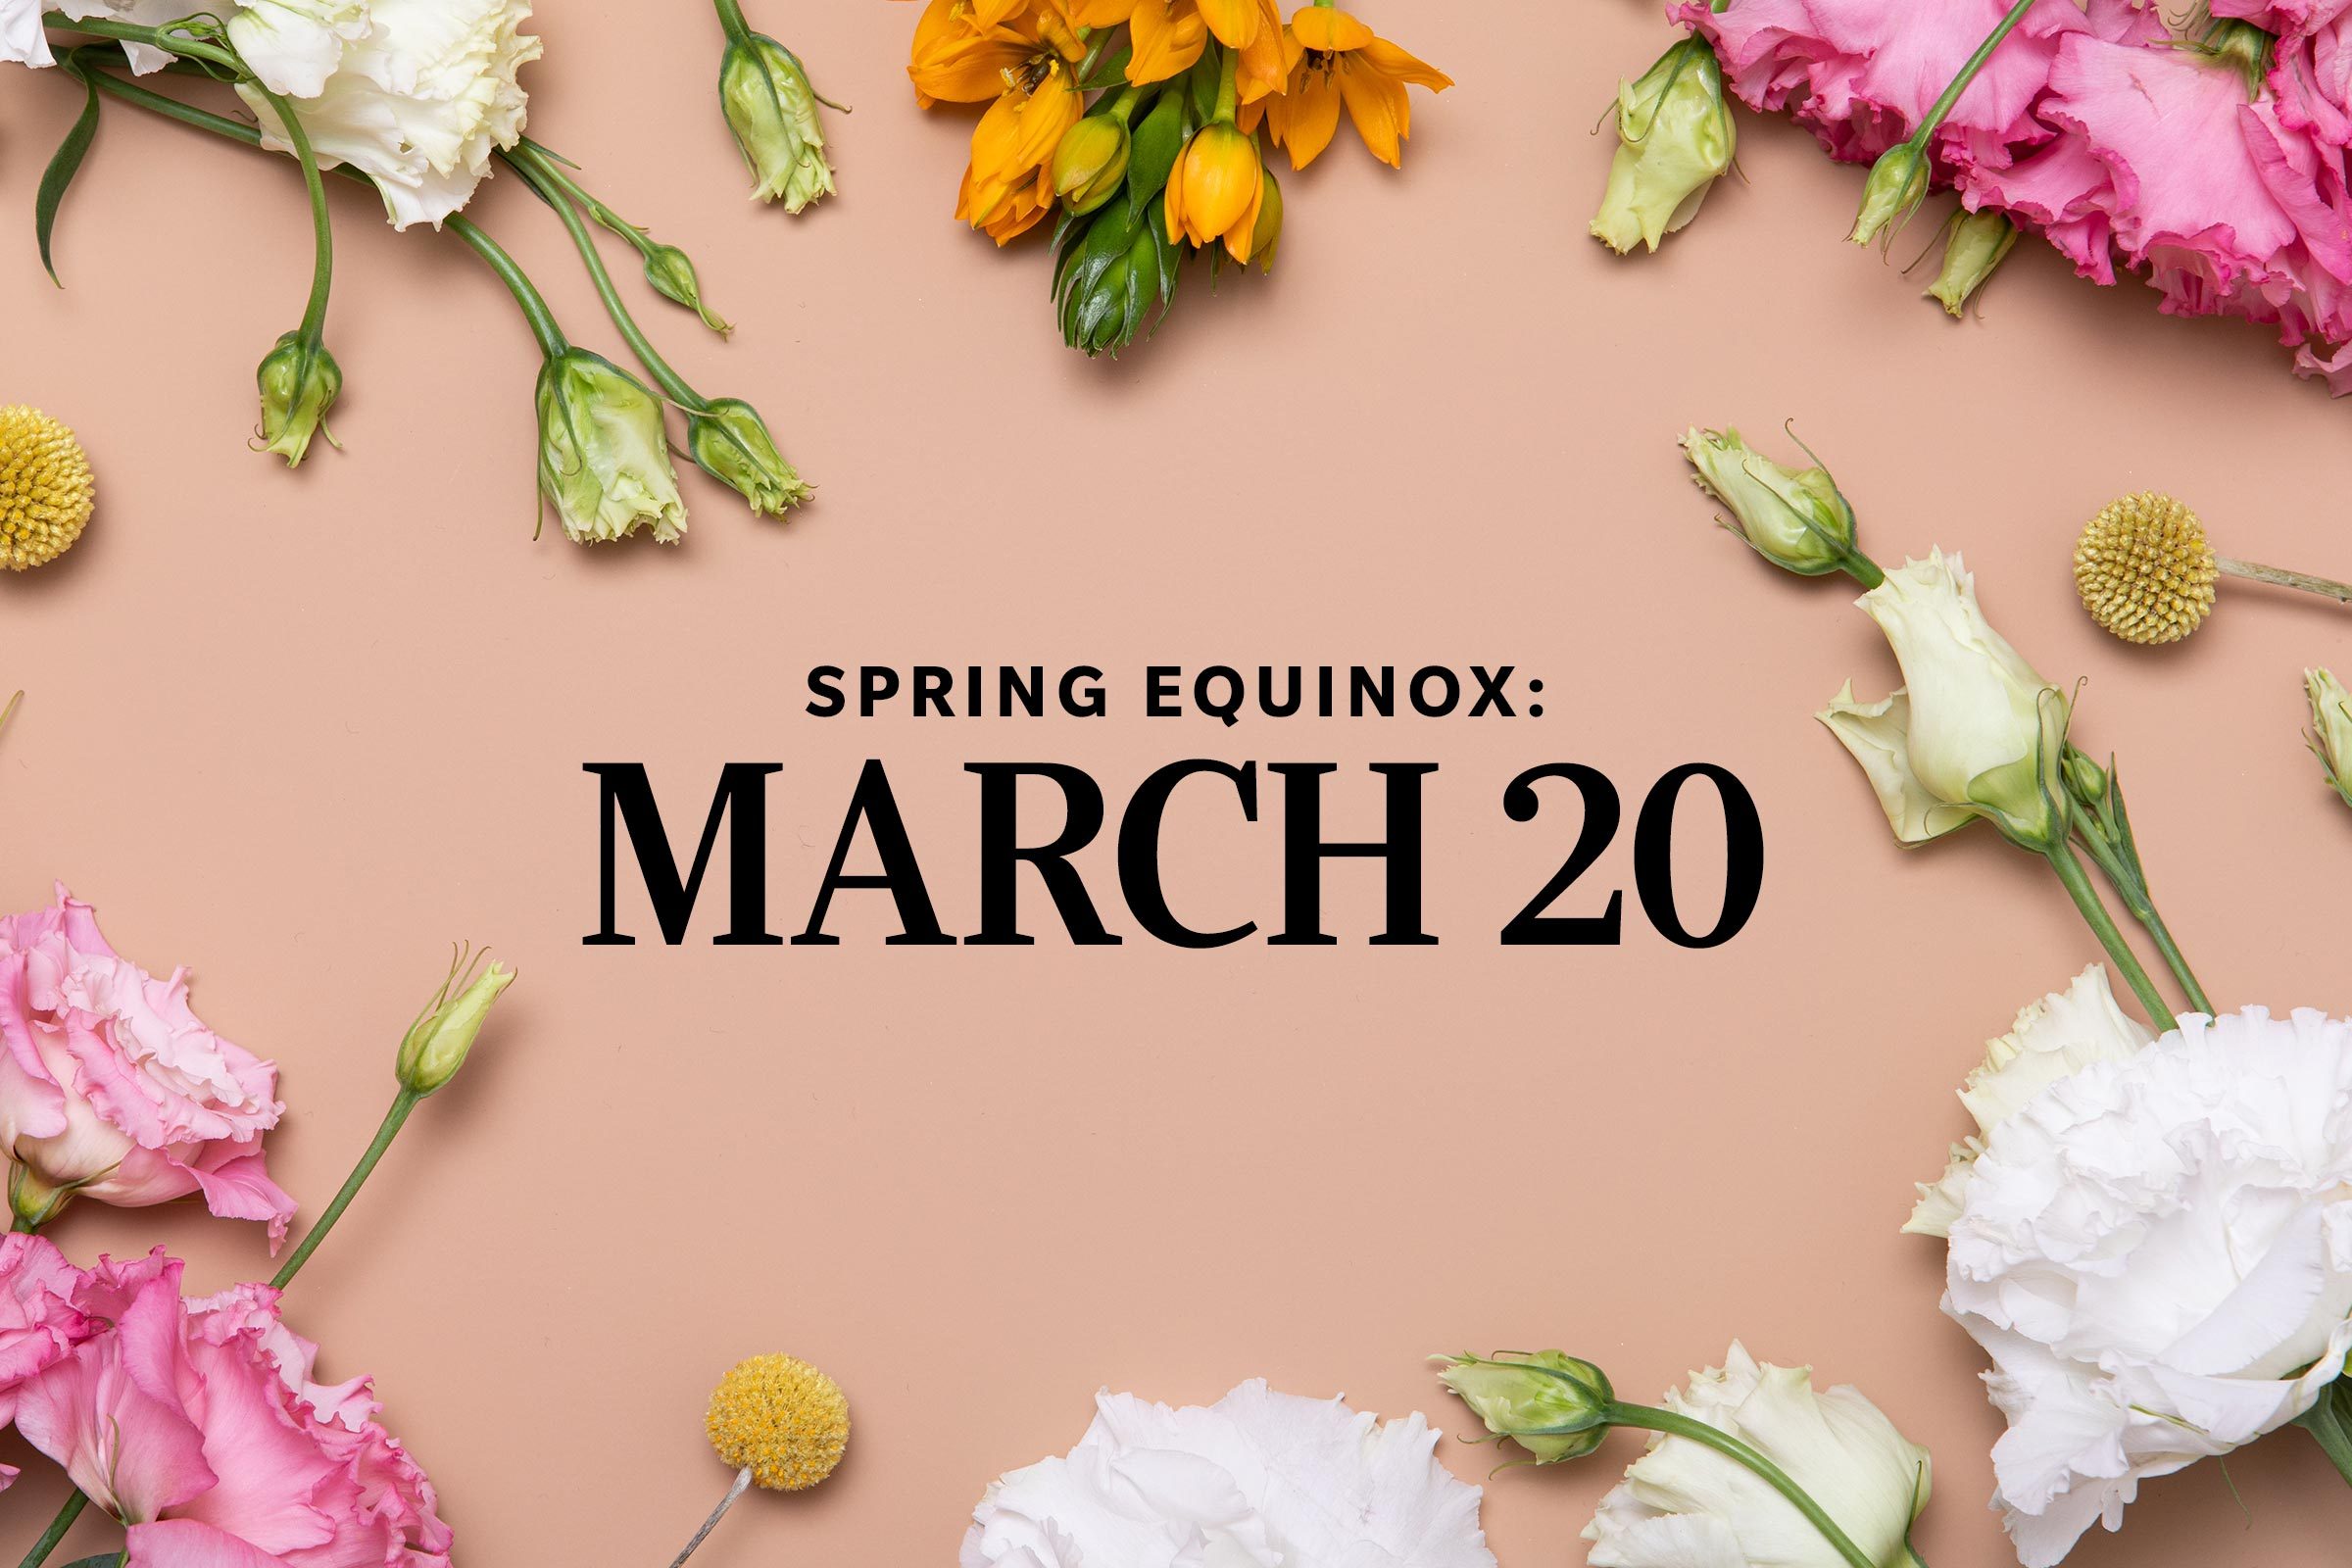 floral background with text that says "Spring equinox: march 20"